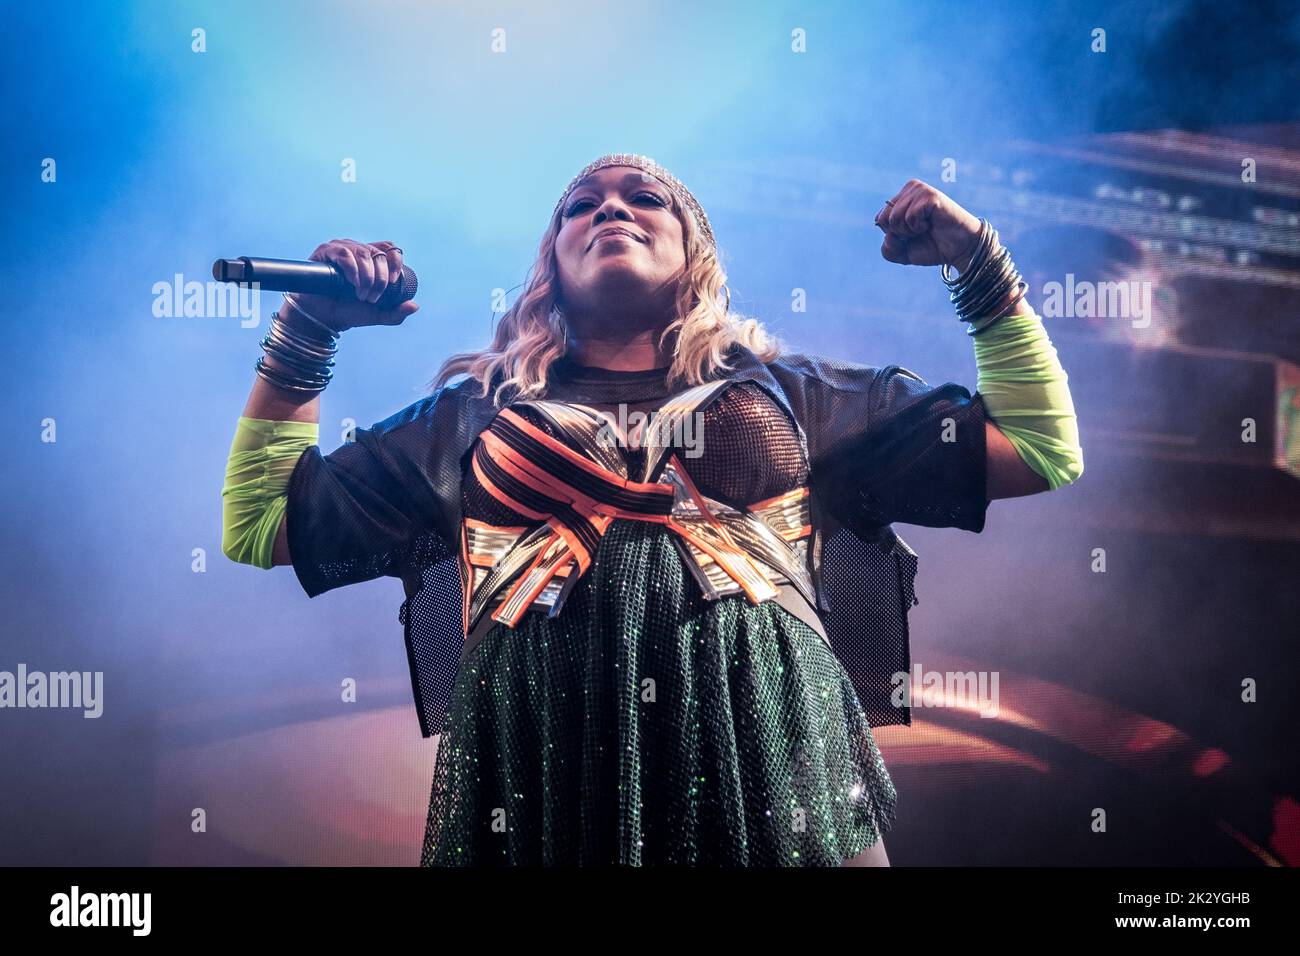 Roskilde, Denmark. 30th, June 2022. The American R&B group TLC performs a live concert during the Danish music festival Roskilde Festival 2022 in Roskilde. Here singer T-Boz is seen live on stage. (Photo credit: Gonzales Photo - Thomas Rasmussen). Stock Photo